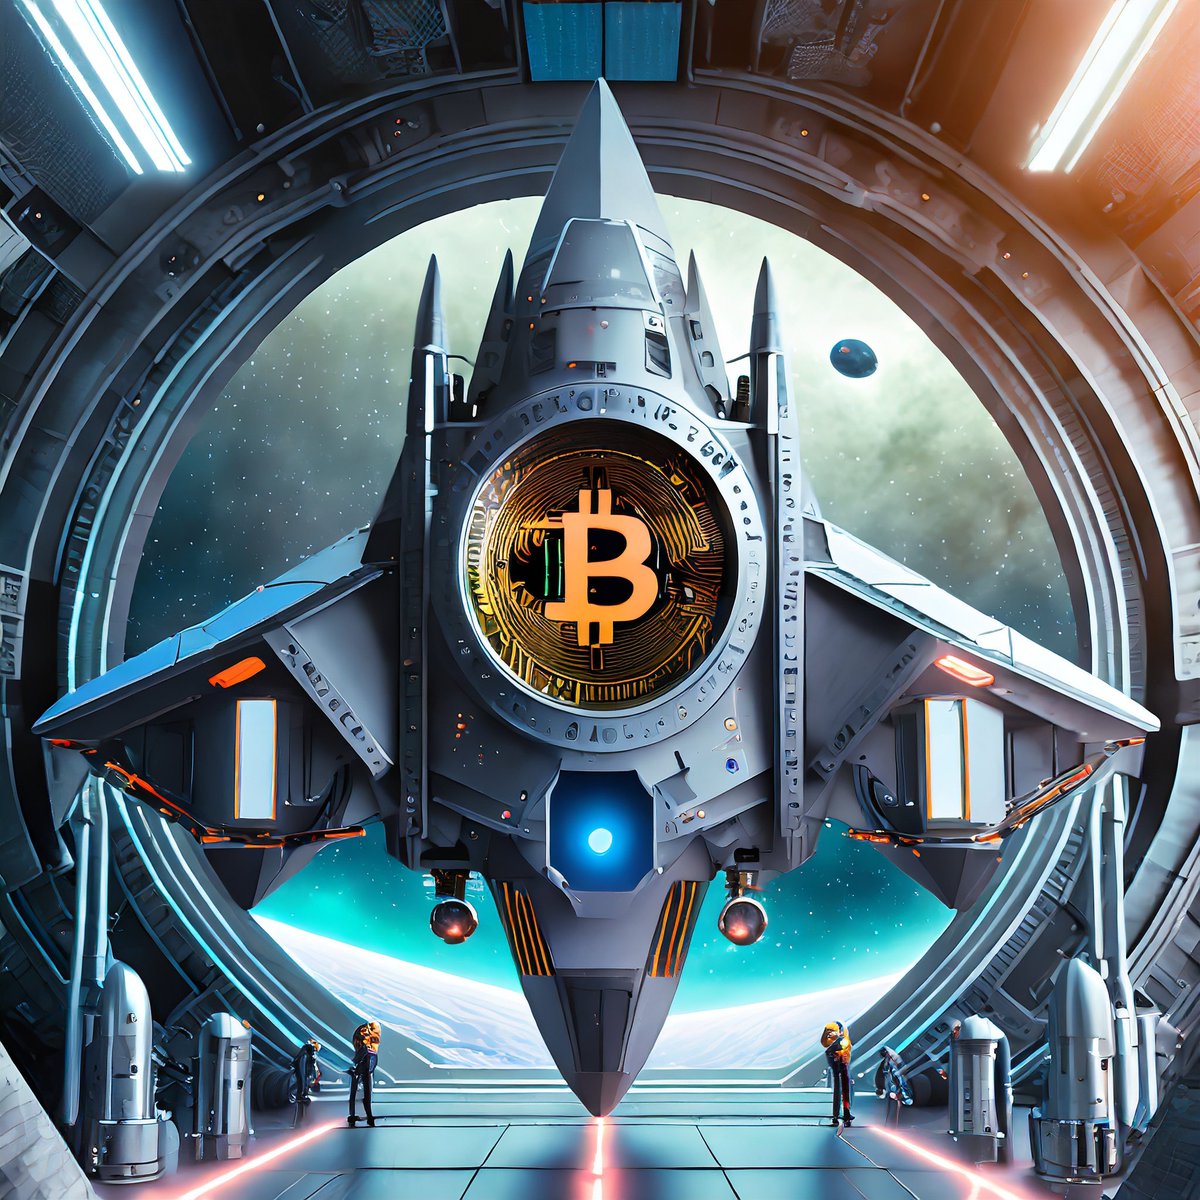 When #HyperDrive is activated it will be too late to catch up...

#BTC #BITCOIN #HALVING

#crypto #MassAdoption 

#Art #NFTs #NFT #NFTCommunity